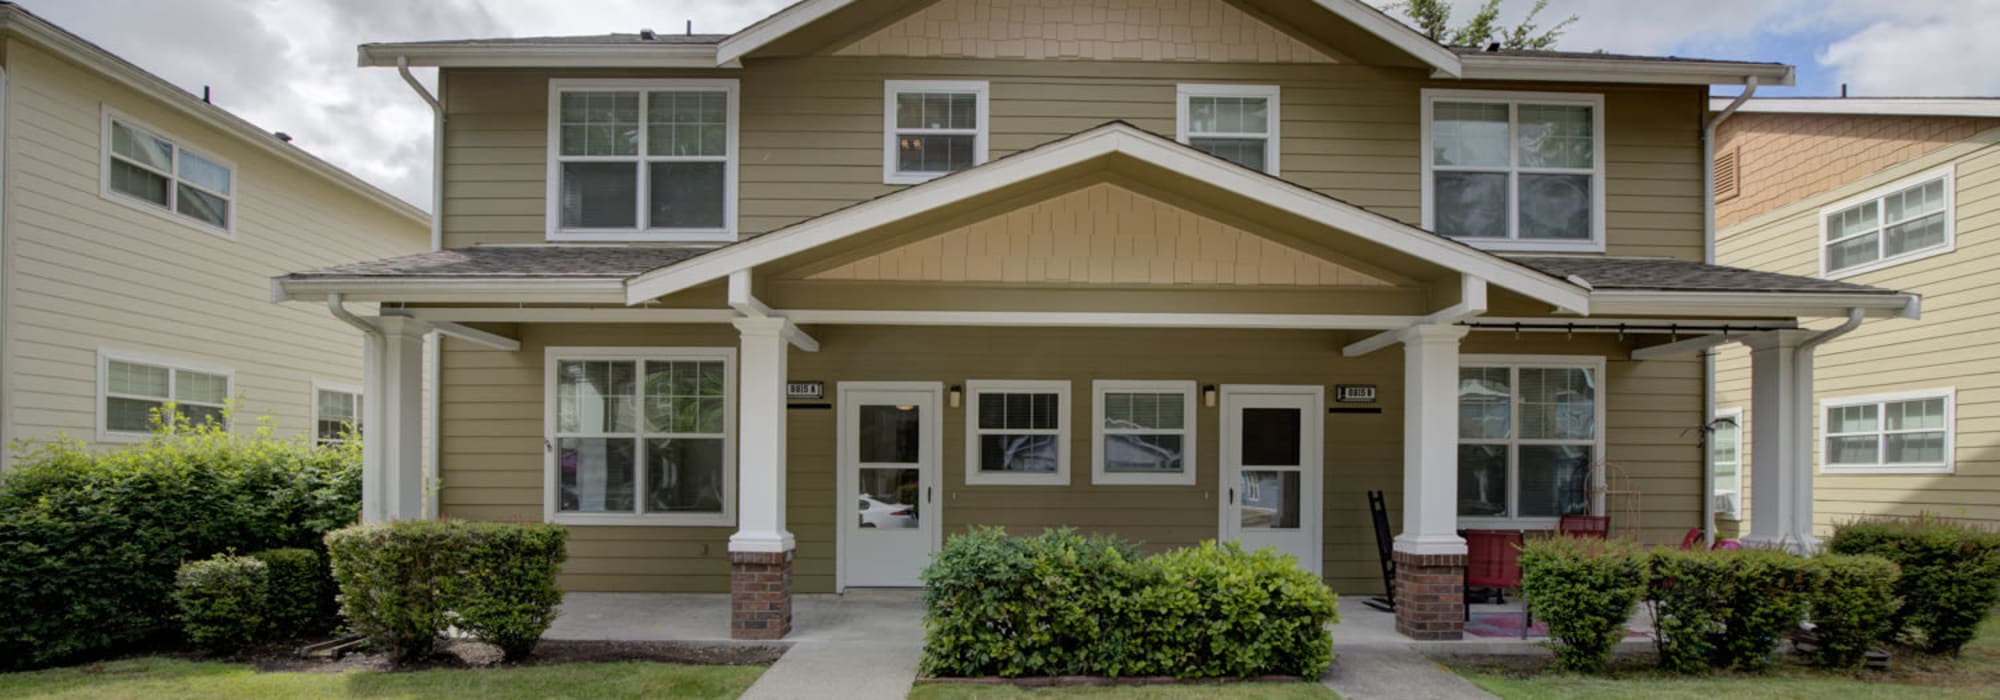 Exterior of home at Joint Base Lewis McChord (JBLM) in Joint Base Lewis McChord, Washington